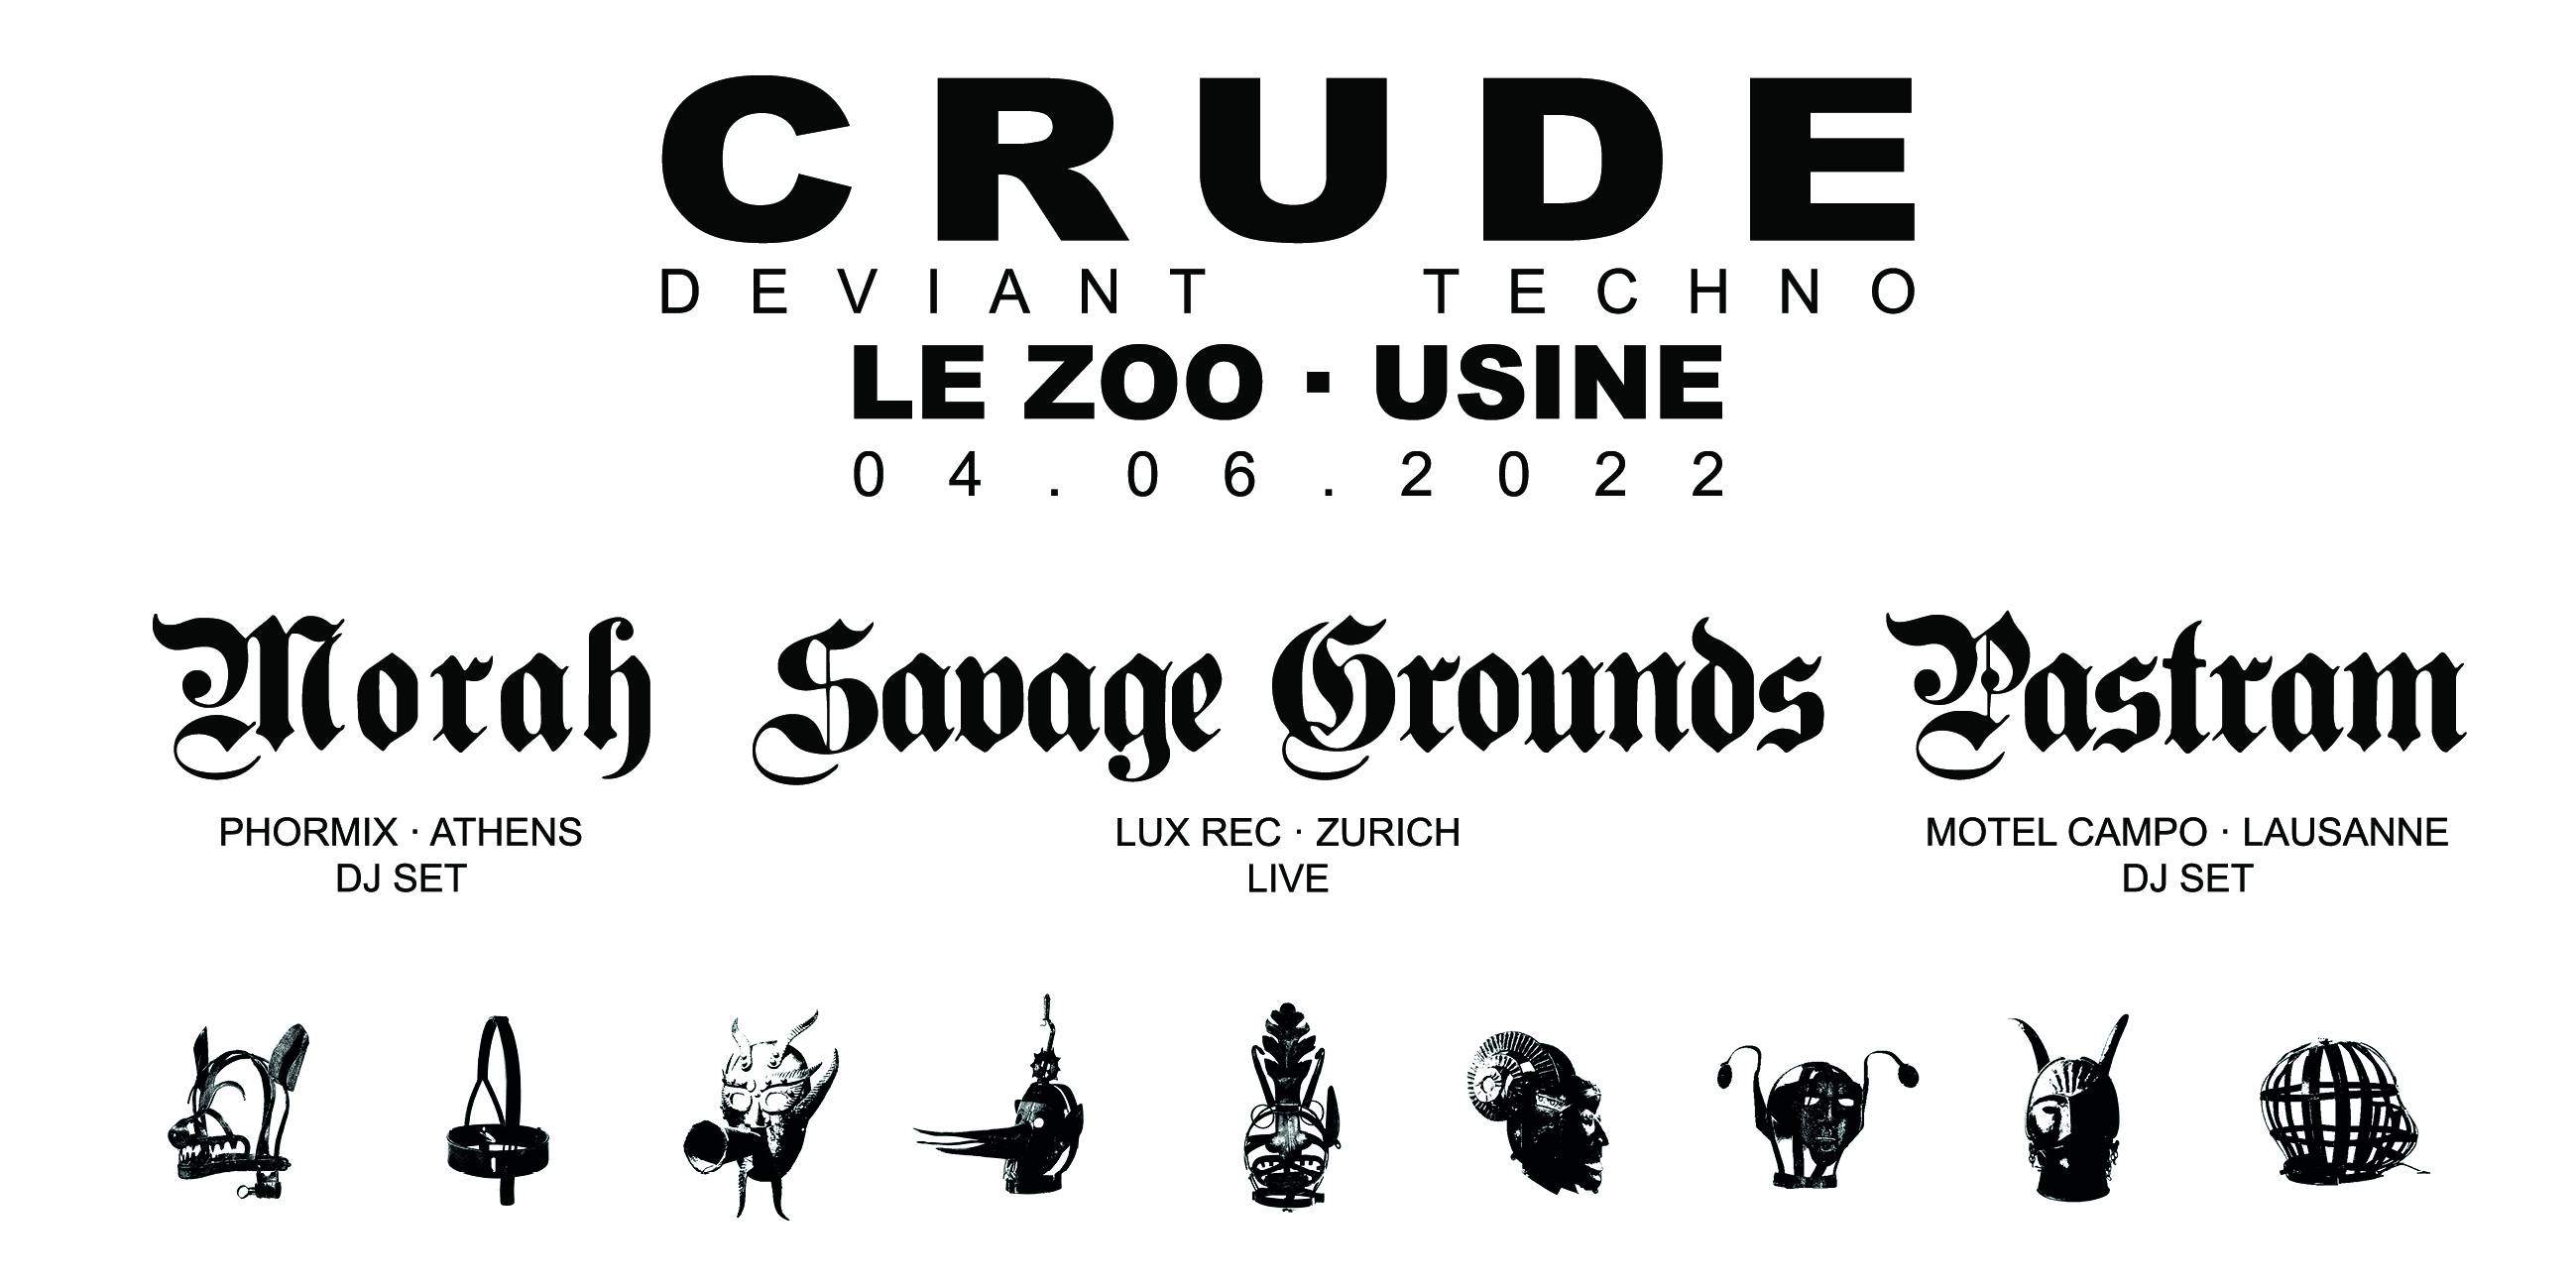 CRUDE - Deviant Techno with Morah, Savage Grounds & Pastram - フライヤー表